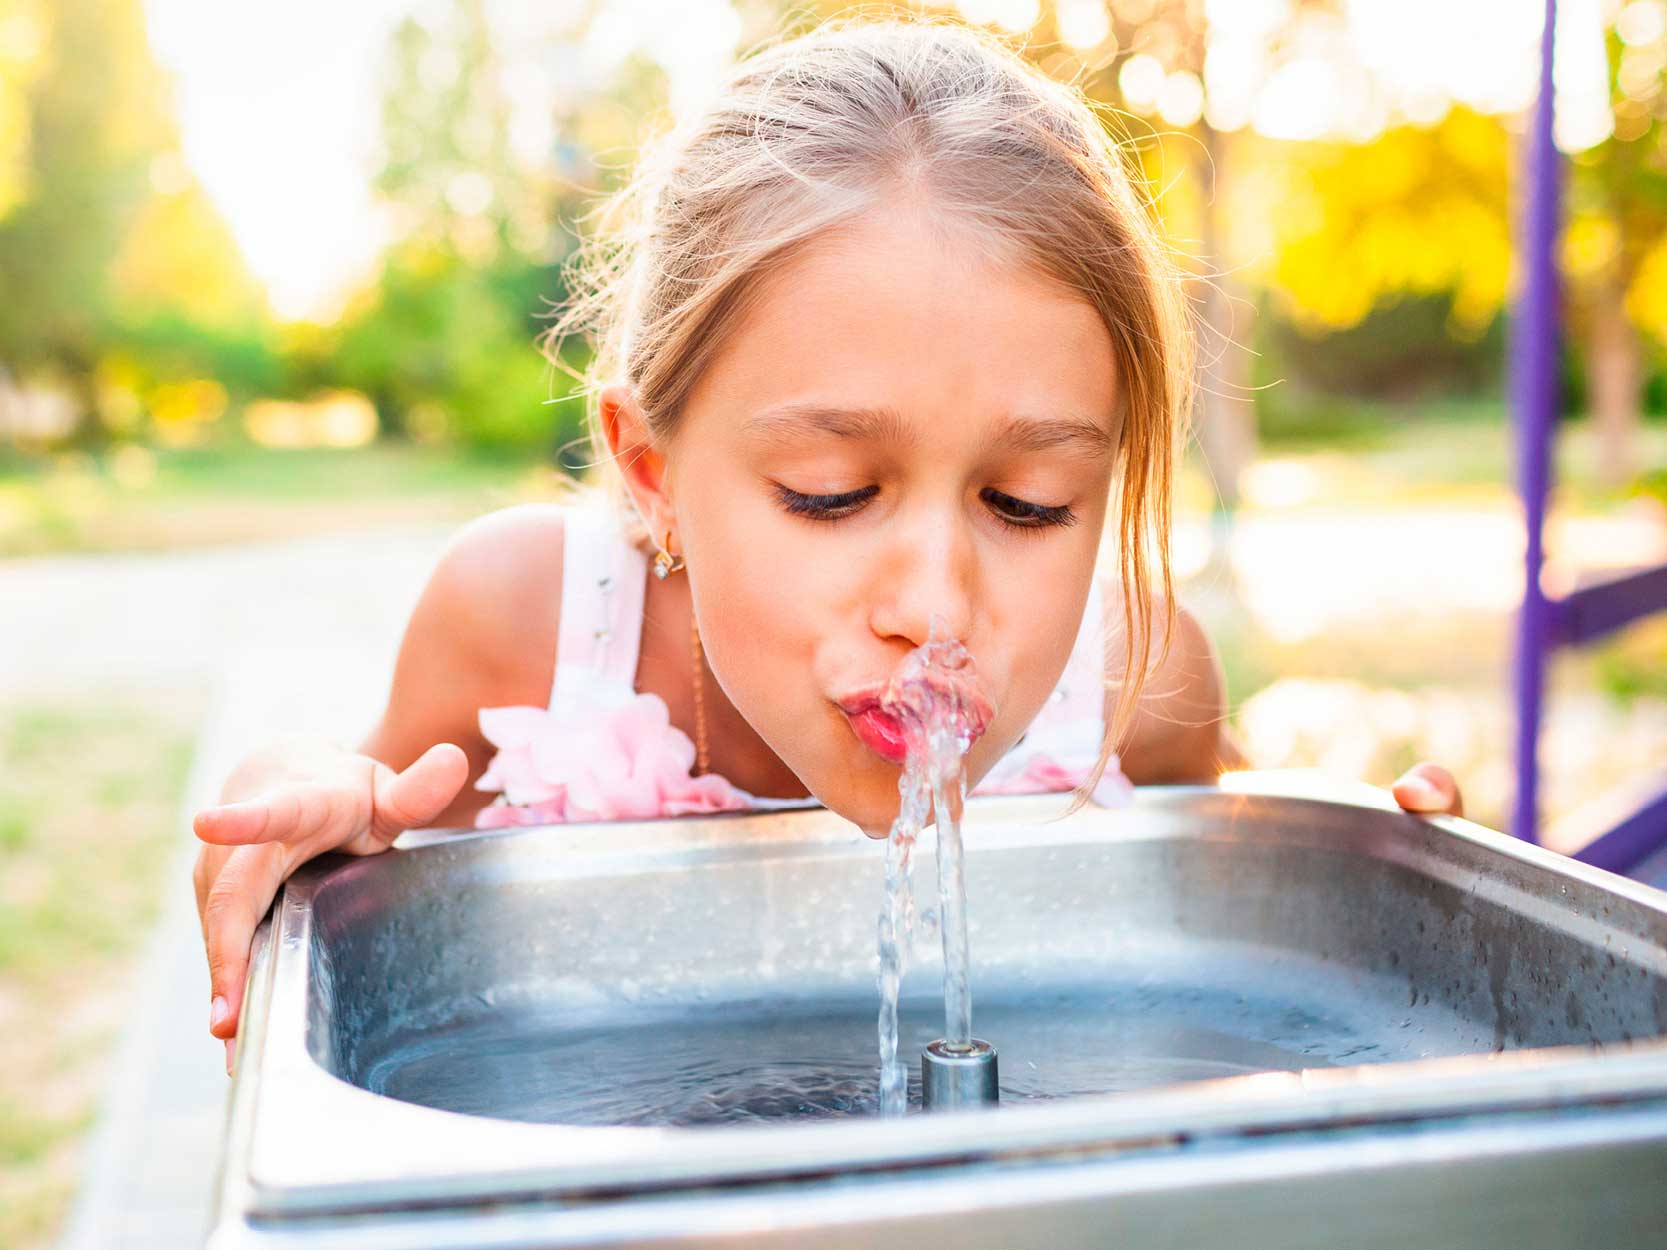 Water Fountains for schools